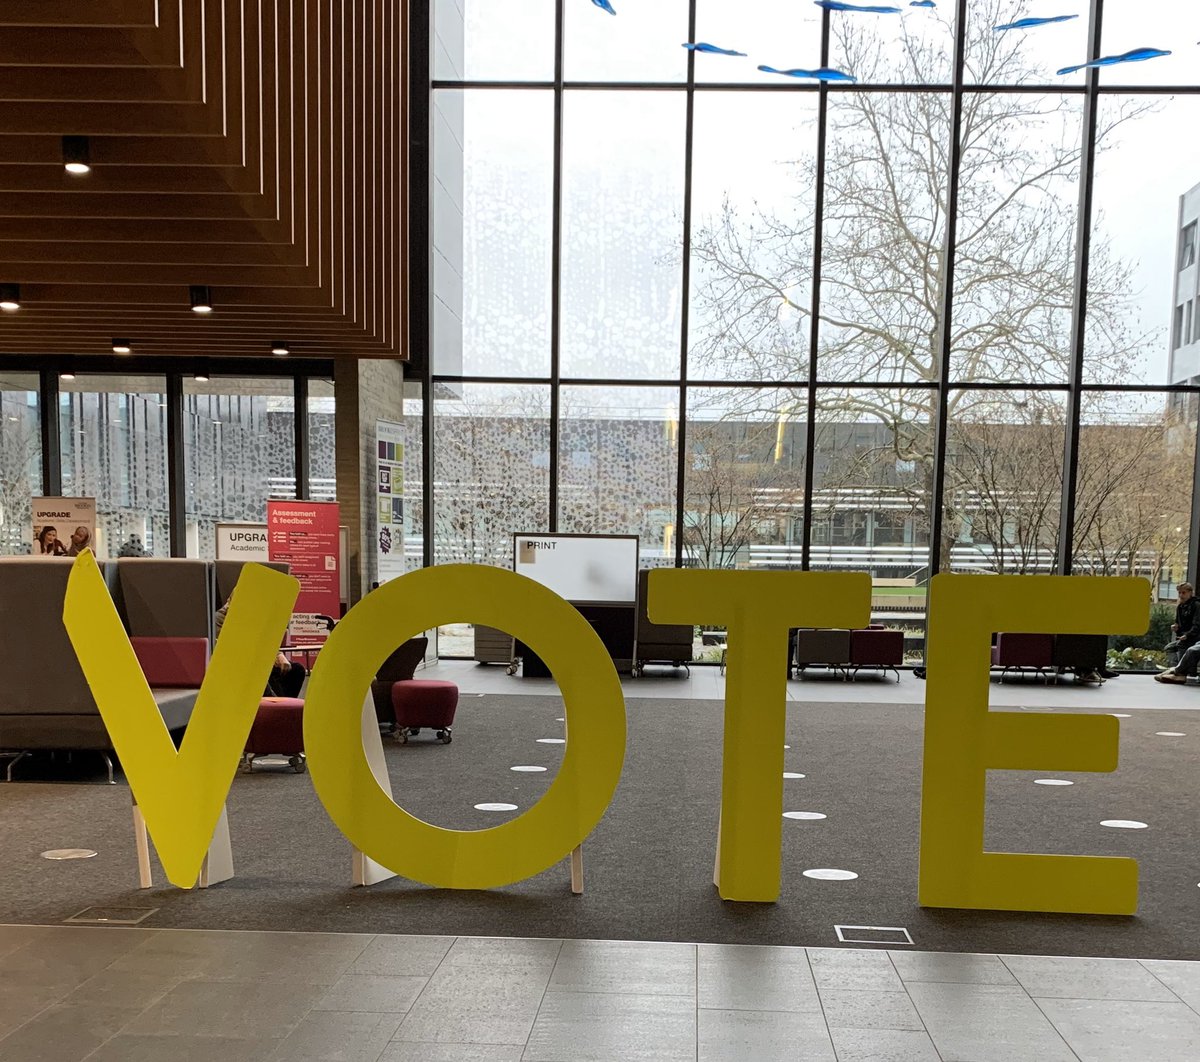 Nice to see this reminder today 🙂 #vote #Election2020 #OxfordBrookesUniversity